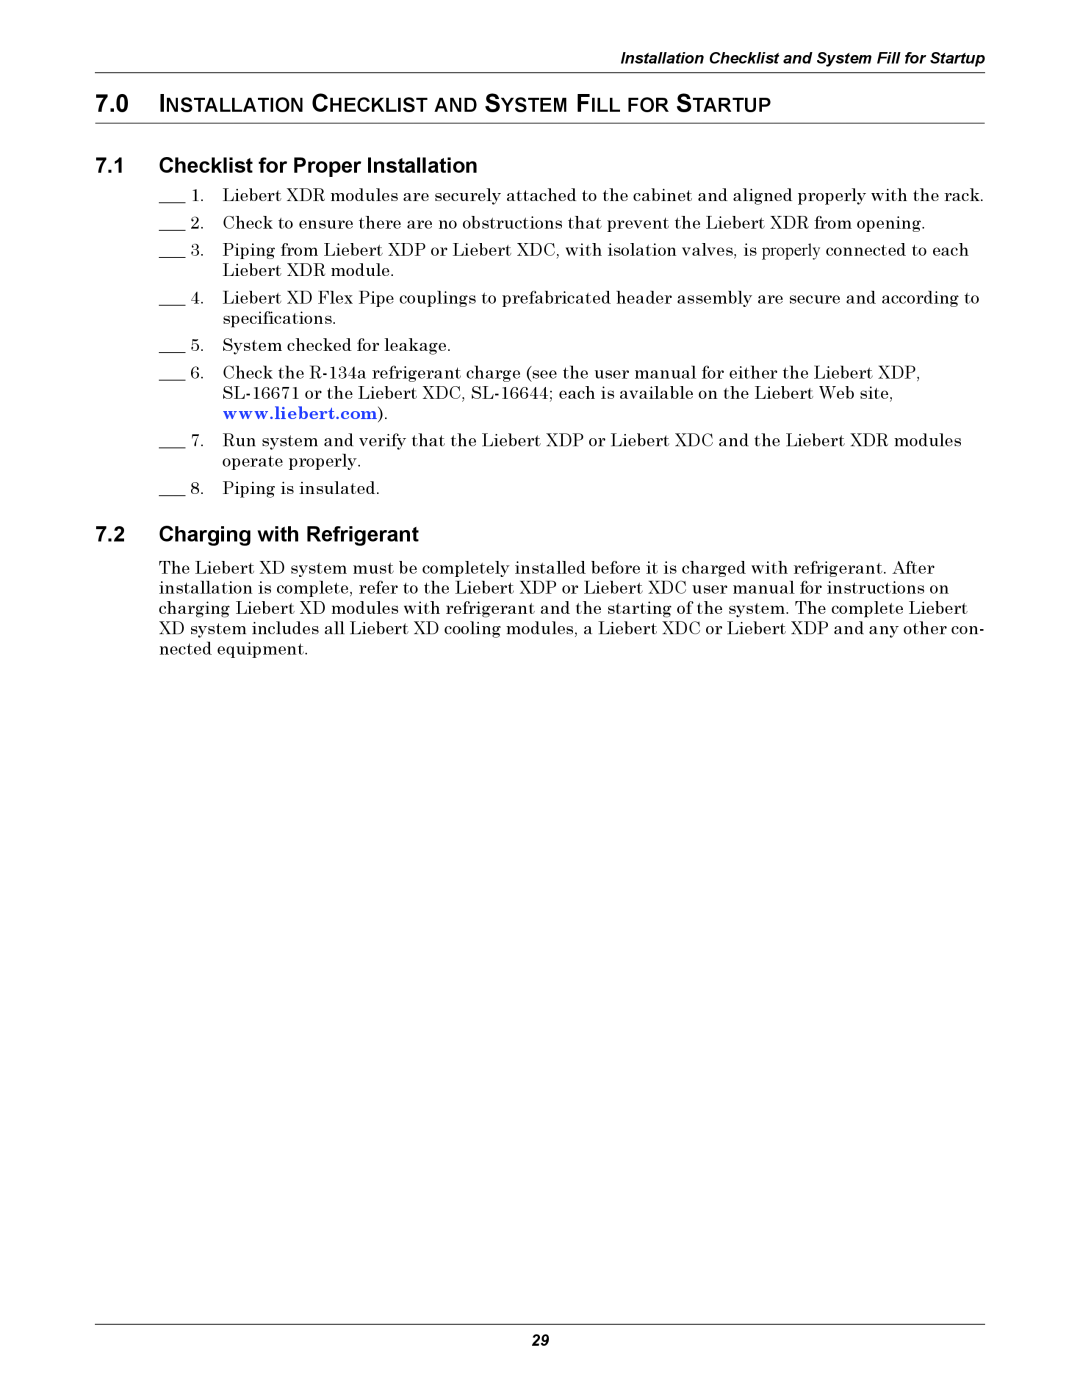 Emerson XDR user manual 7.1Checklist for Proper Installation, 7.2Charging with Refrigerant 